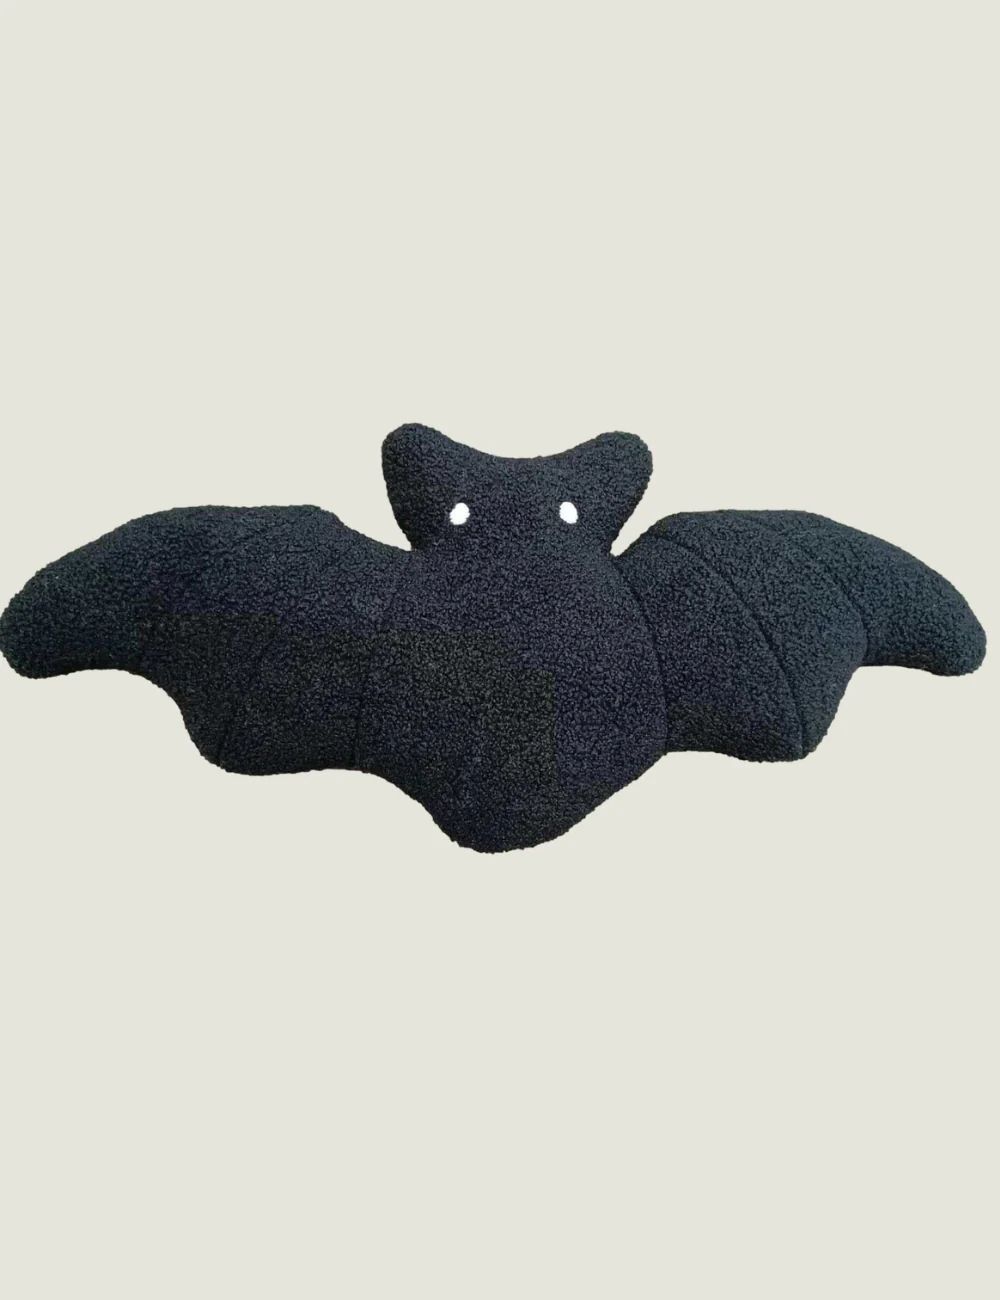 TSC x Tia Booth: Bat 3D Shaped Pillow | The Styled Collection